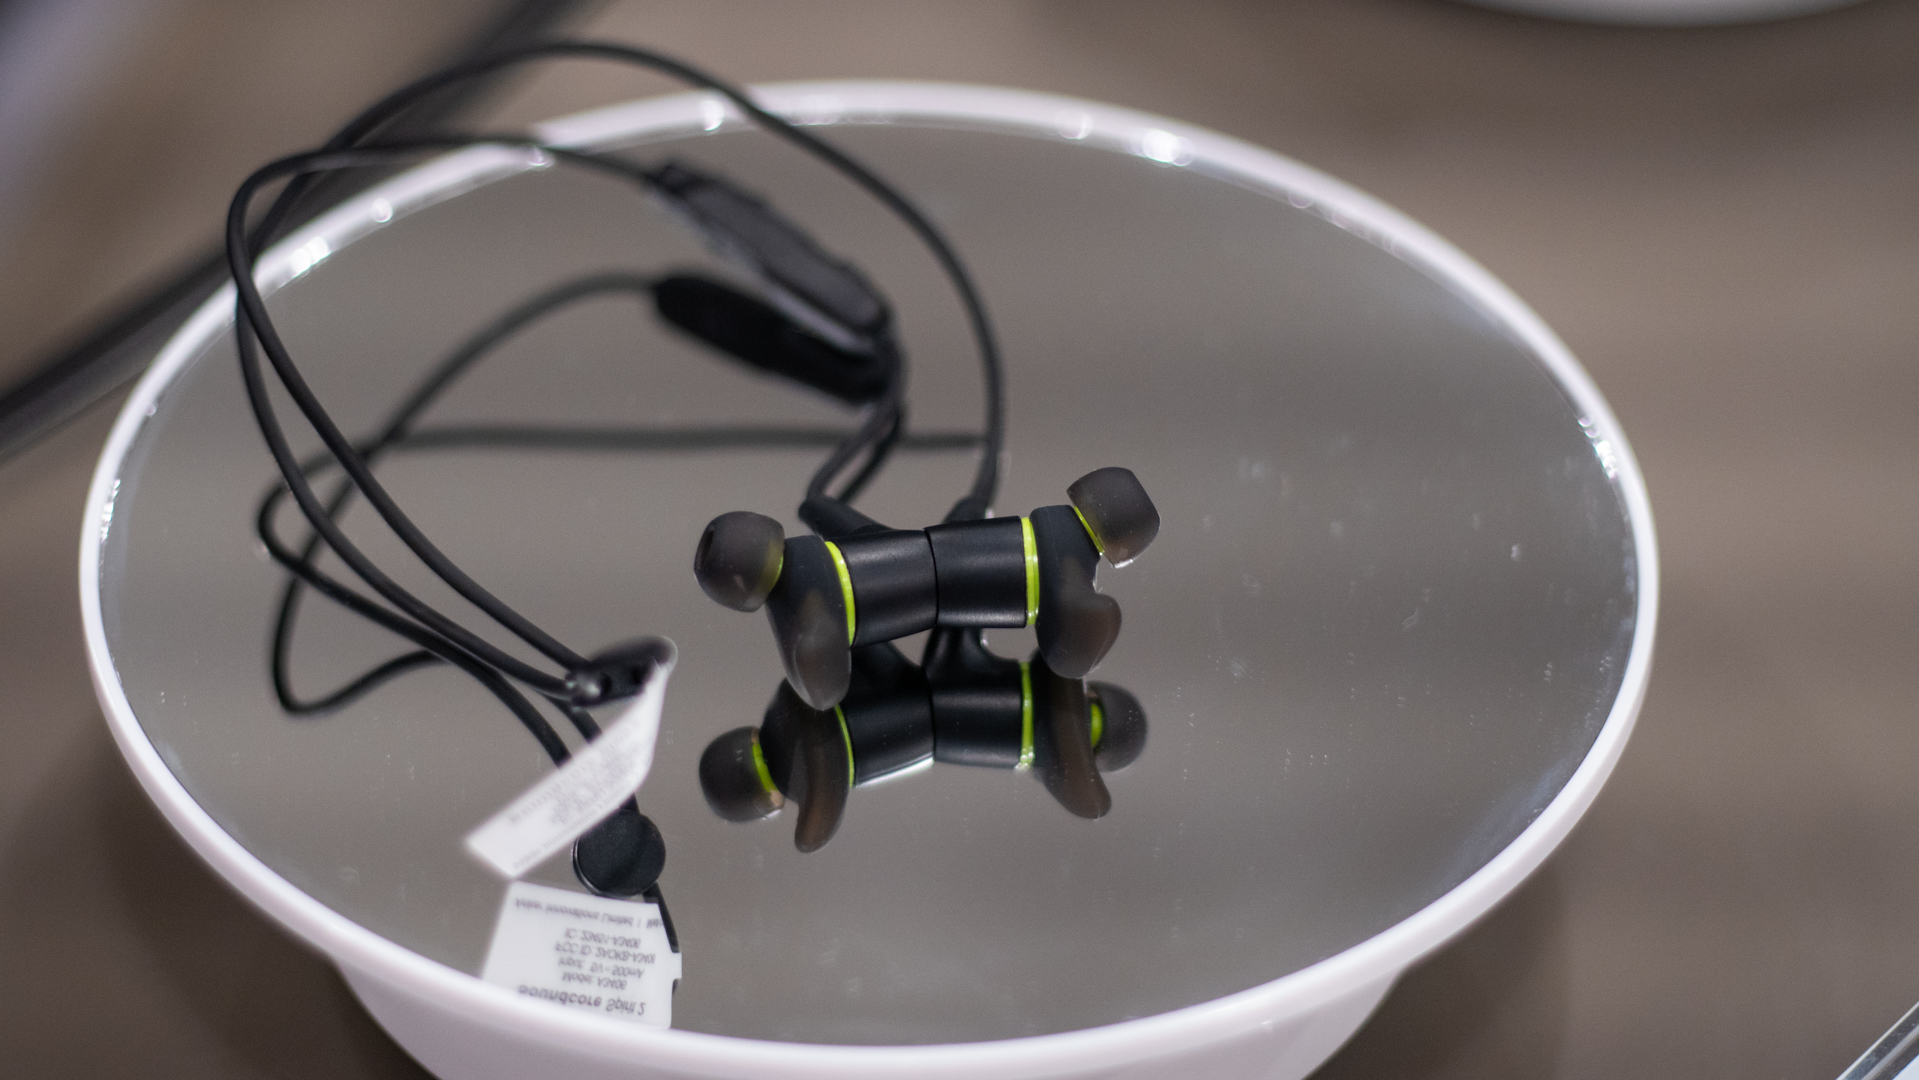 Anker Soundcore Spirit 2 Bluetooth earbuds on display